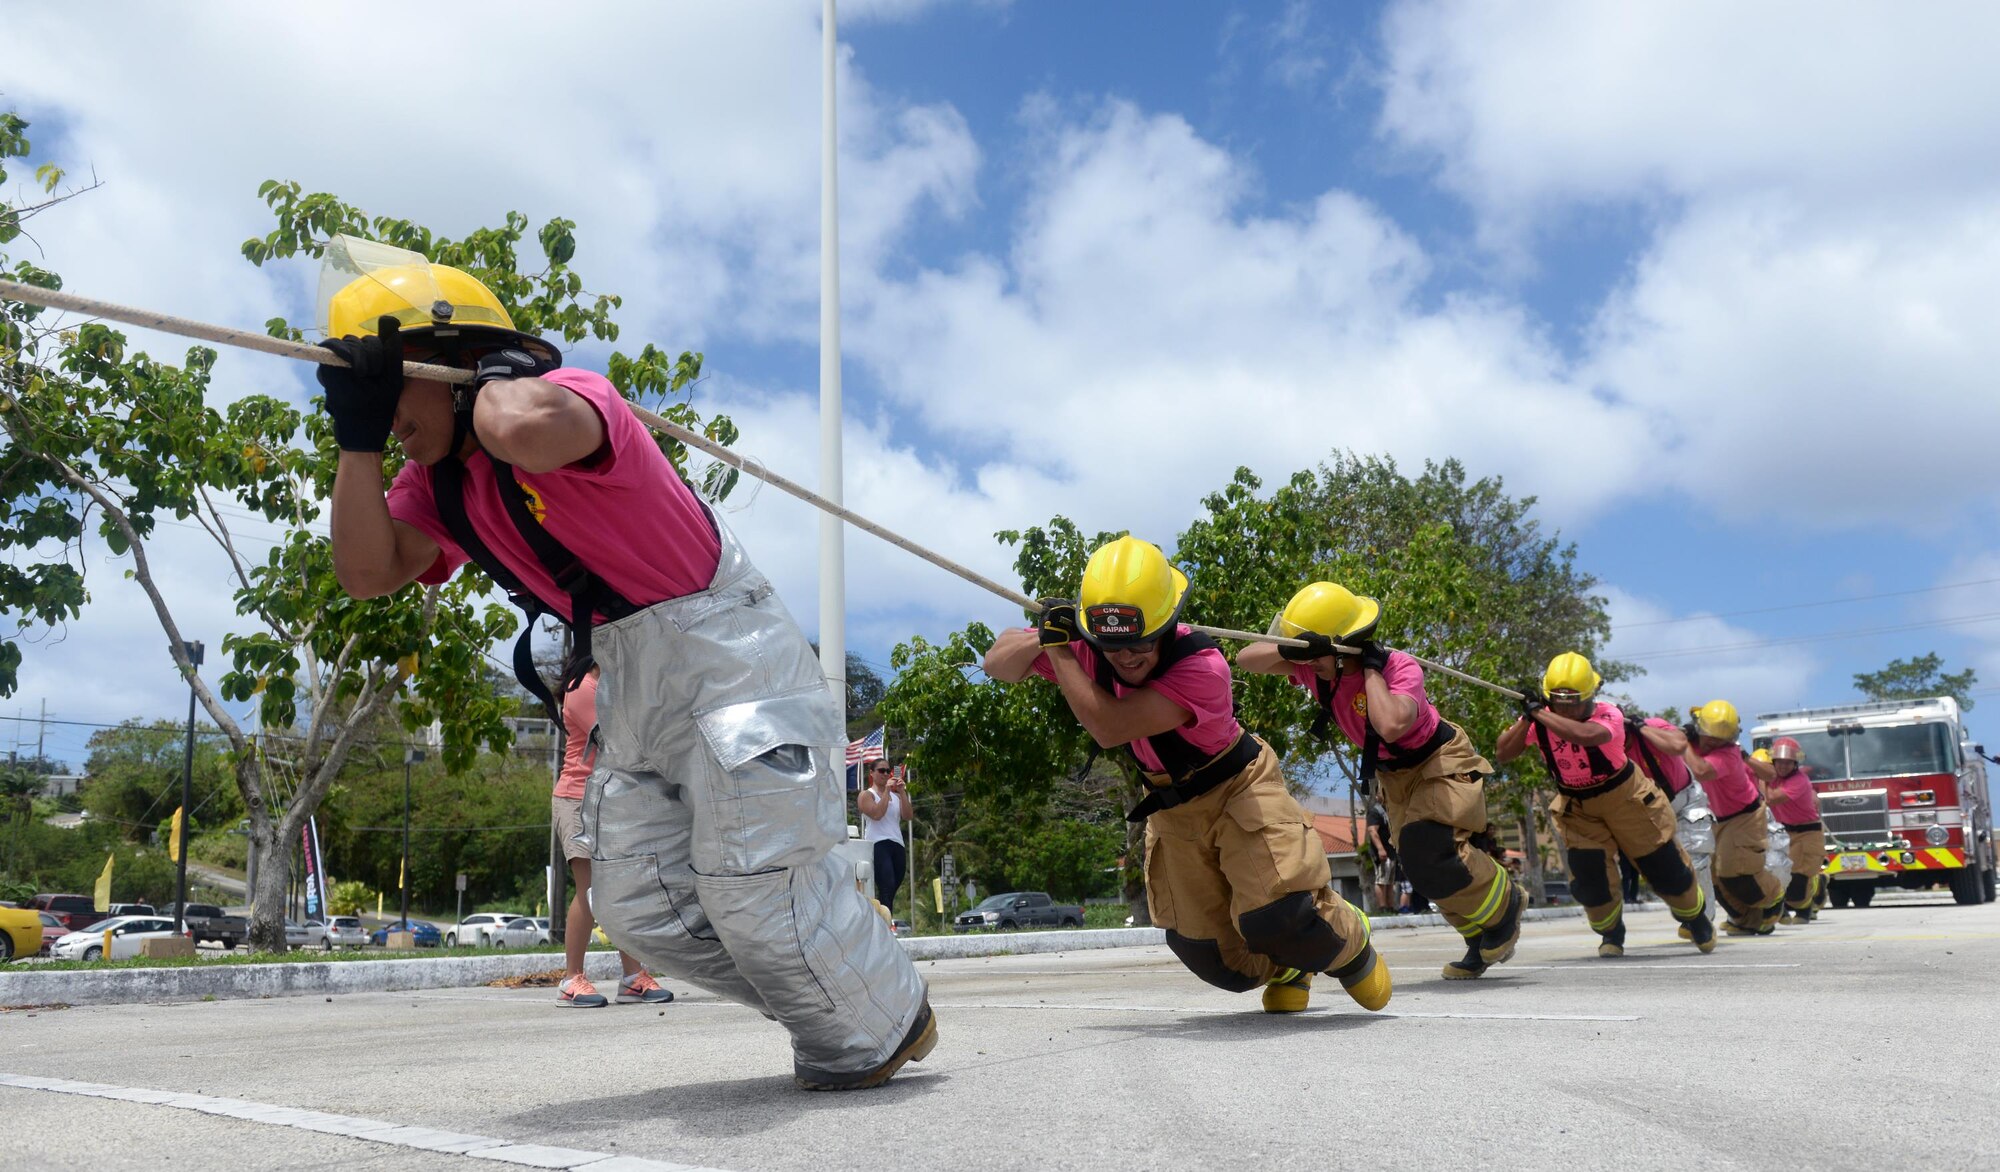 Firefighters from the Saipan Airport aircraft rescue pull a fire truck during the annual Guam Fire Muster competition March 5, 2016, in Hagåtña, Guam. The Saipan Airport aircraft rescue firefighting team travelled more than 100 miles to compete in the 2016 Guam Fire Muster, which also marked the first time Saipan participated in the event. (U.S. Air Force photo/Staff Sgt. Benjamin Gonsier)